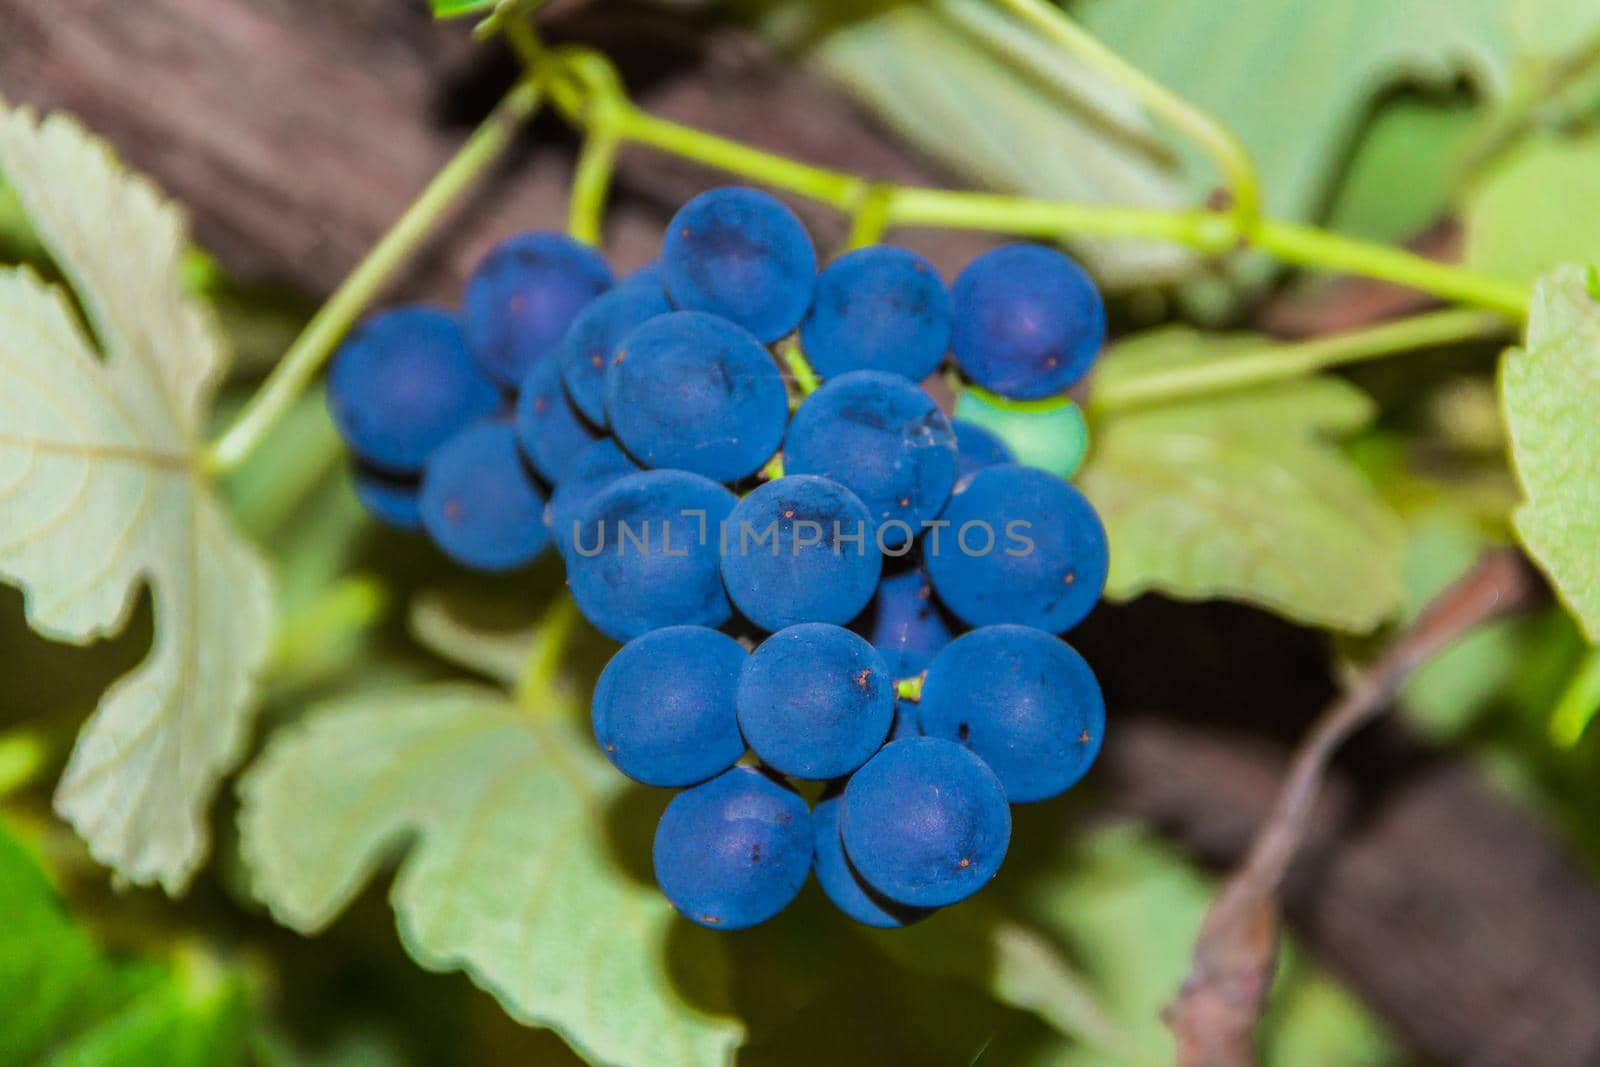 detail of a bunch of blue grapes of the Vitis labrusca variety in the orchard